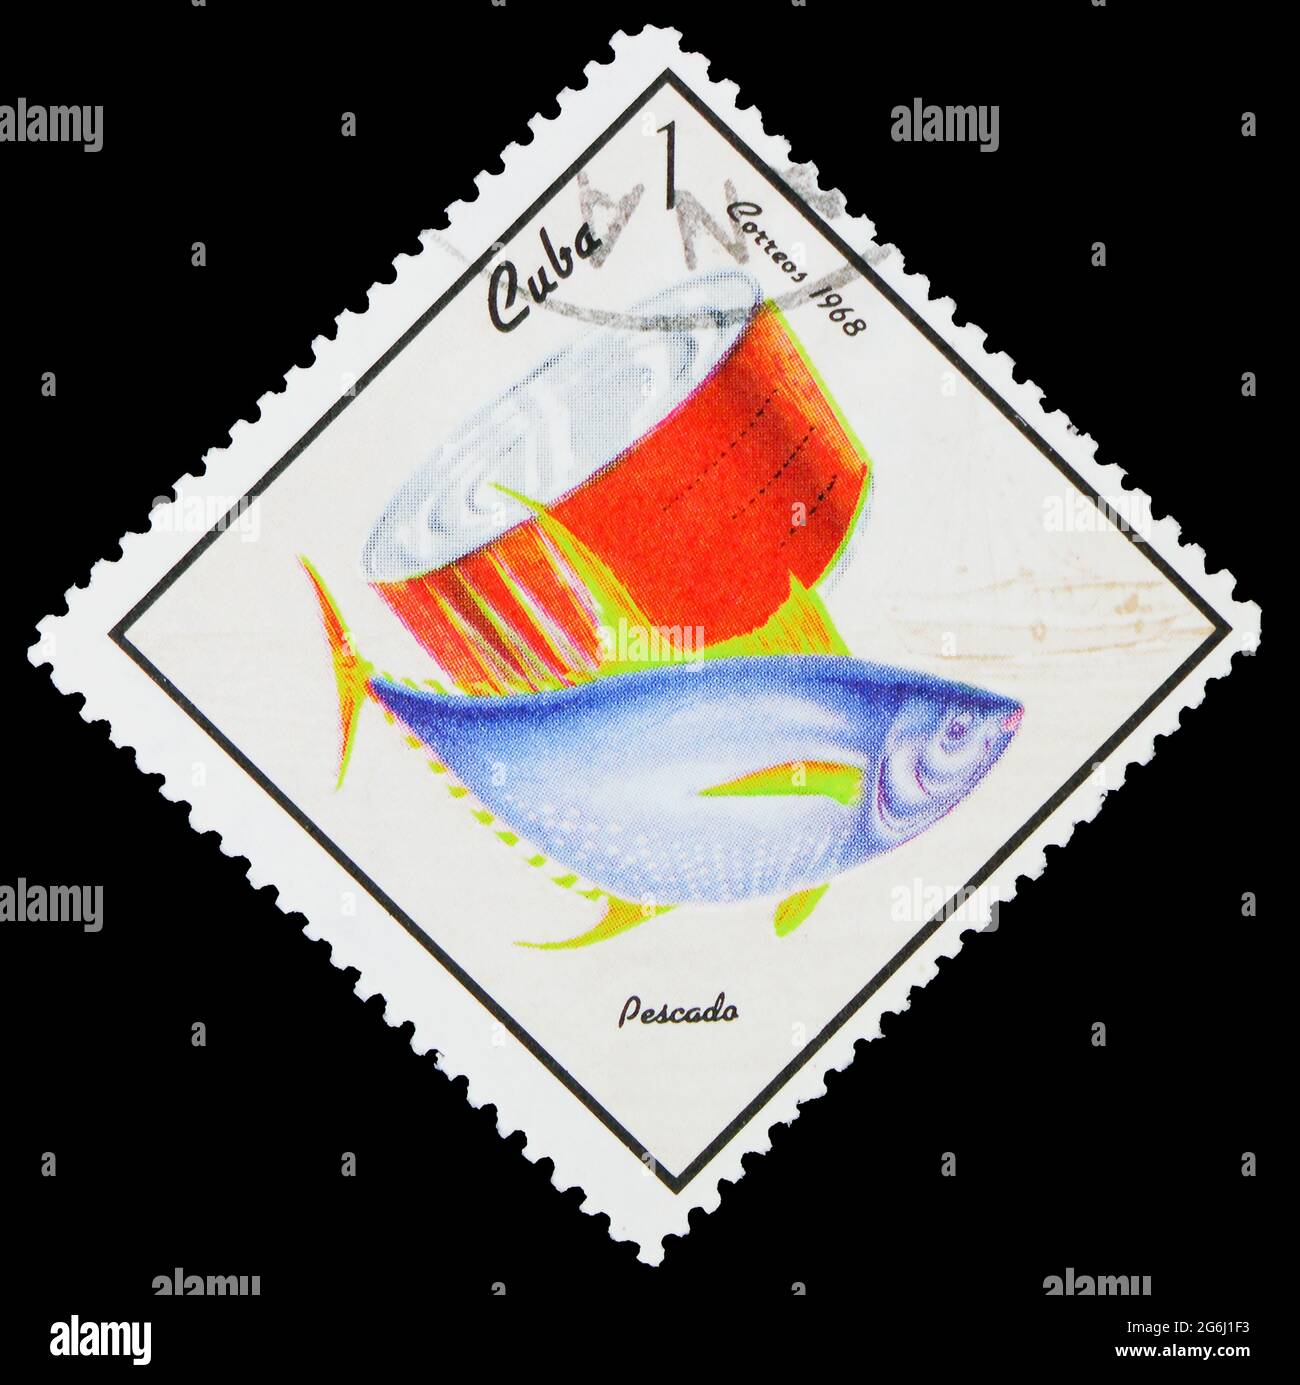 MOSCOW, RUSSIA - MARCH 21, 2020: Postage stamp printed in Cuba shows Yellowfin Tuna (Thunnus albacares), Fish Can, Food Industry serie, circa 1968 Stock Photo